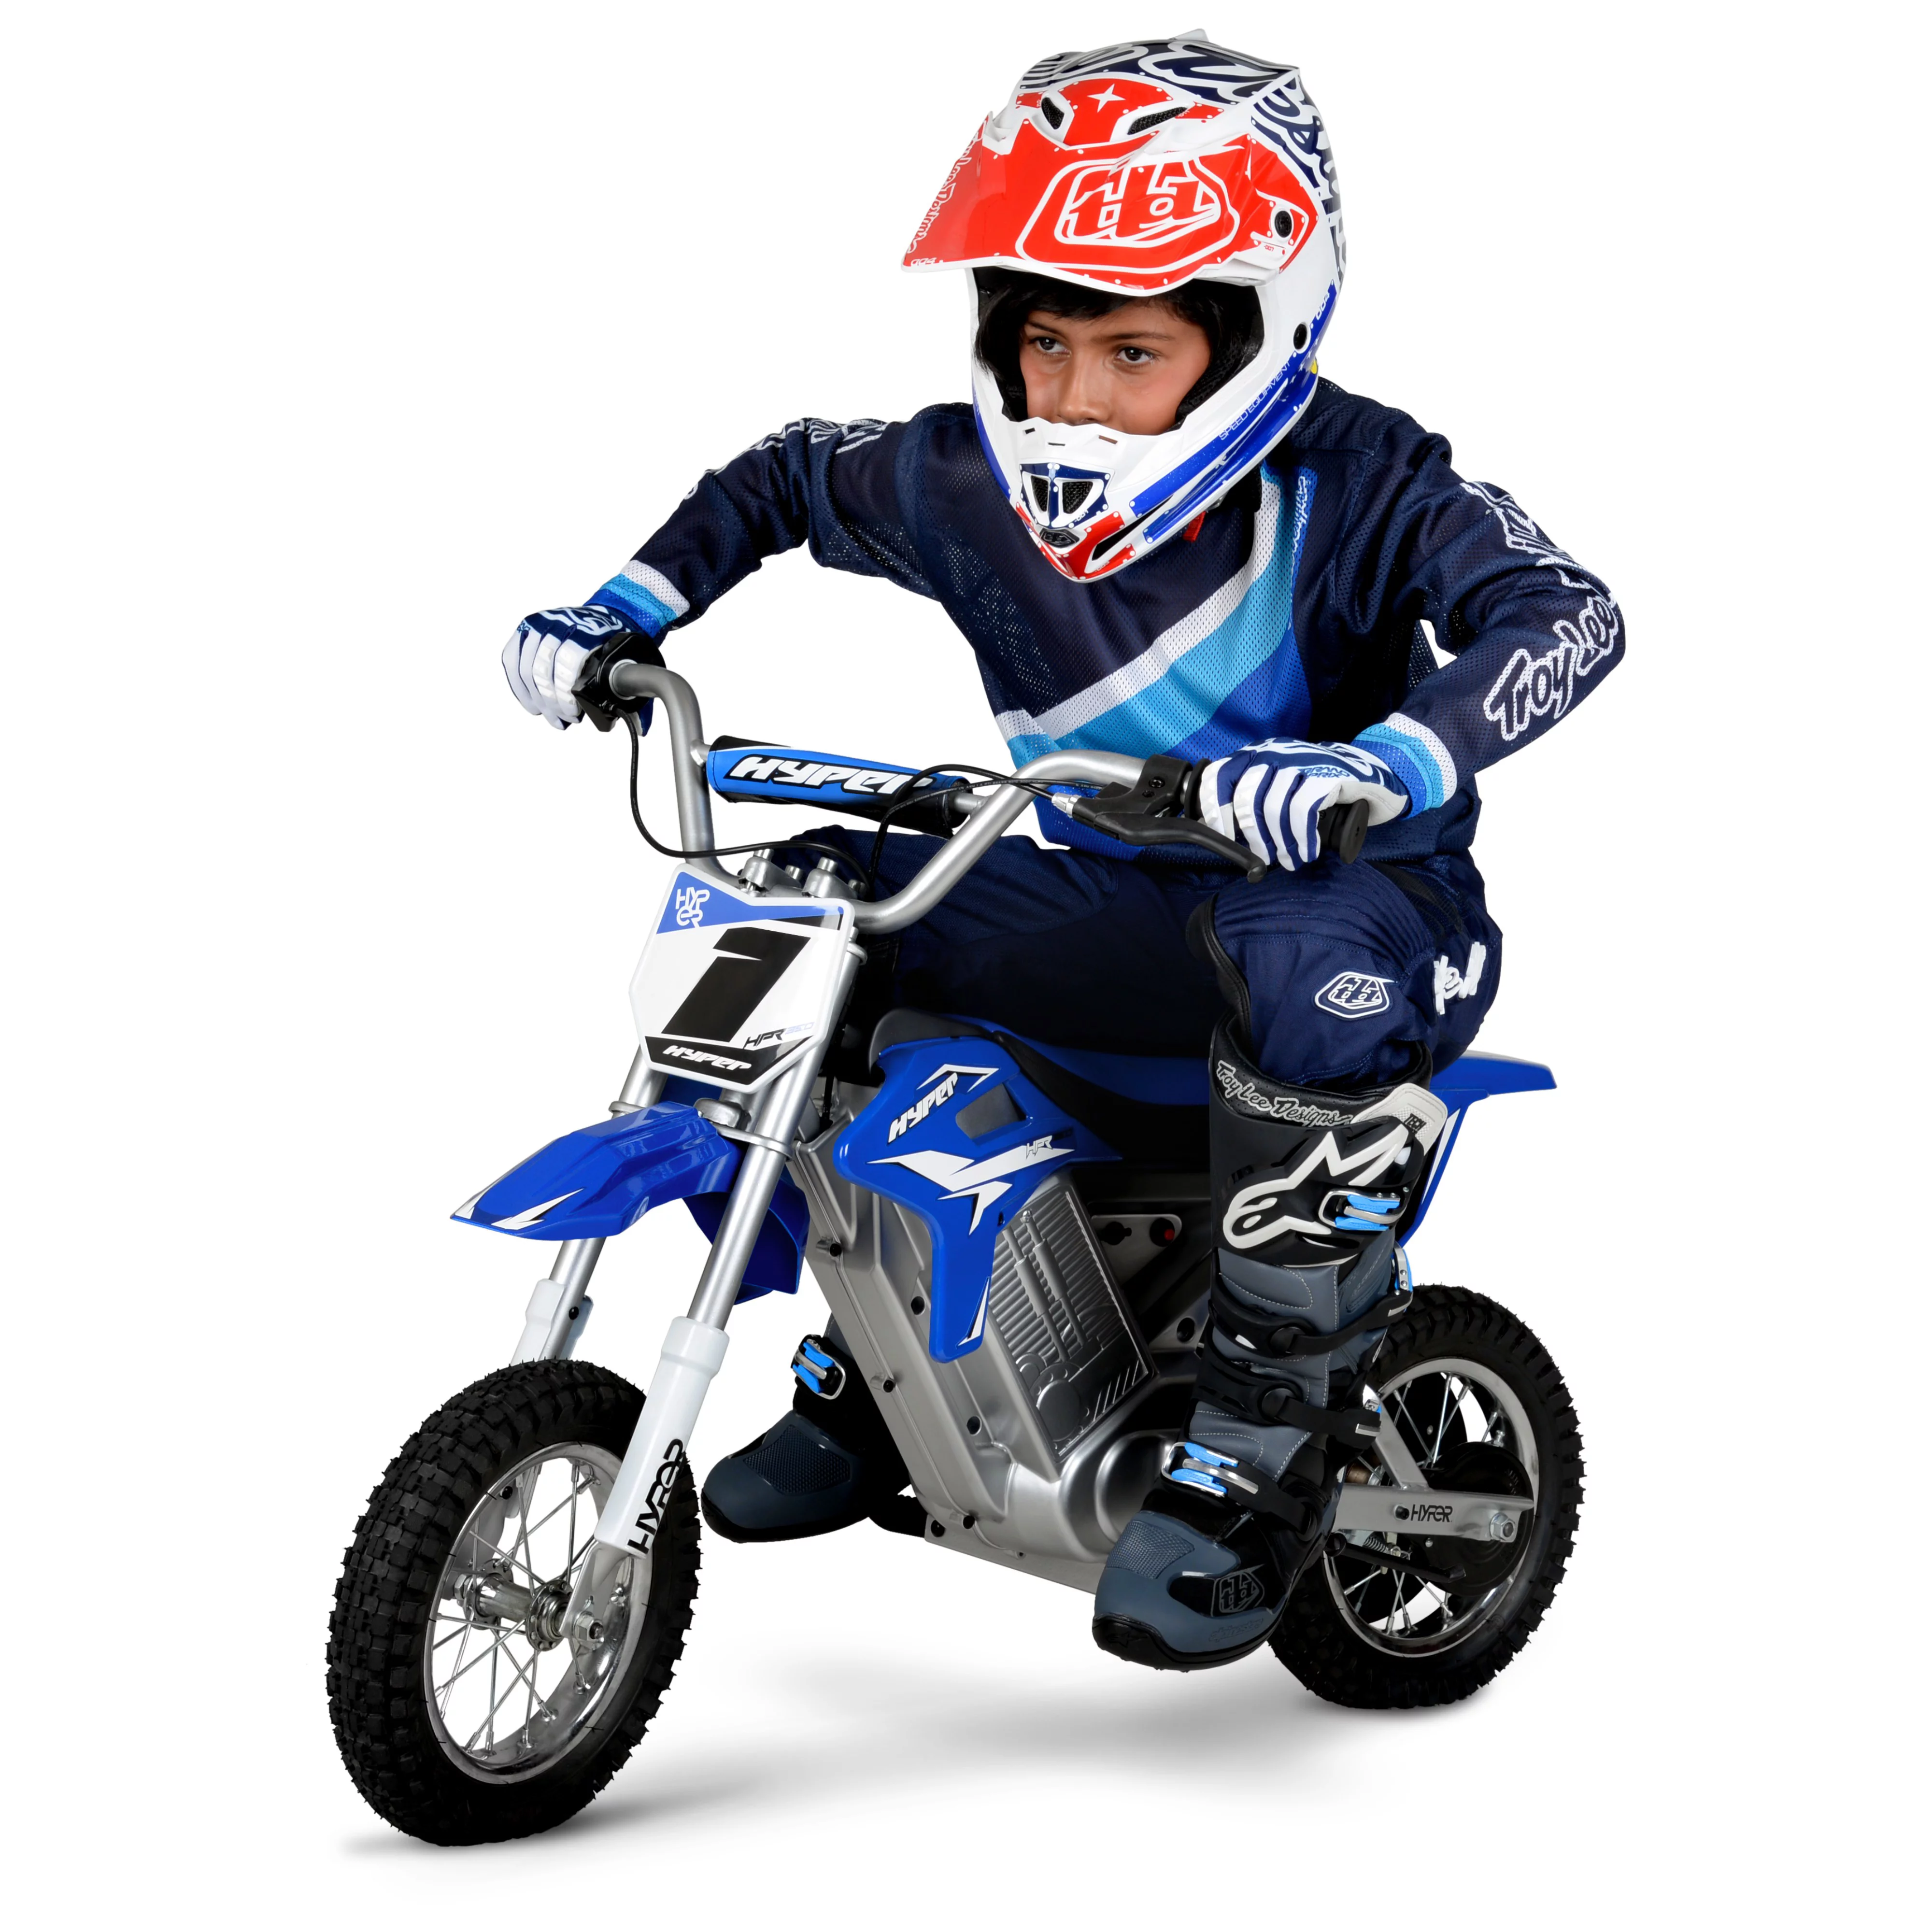 Hyper Toys HPR 350 Dirt Bike 24 Volt Electric Motorcycle in Blue